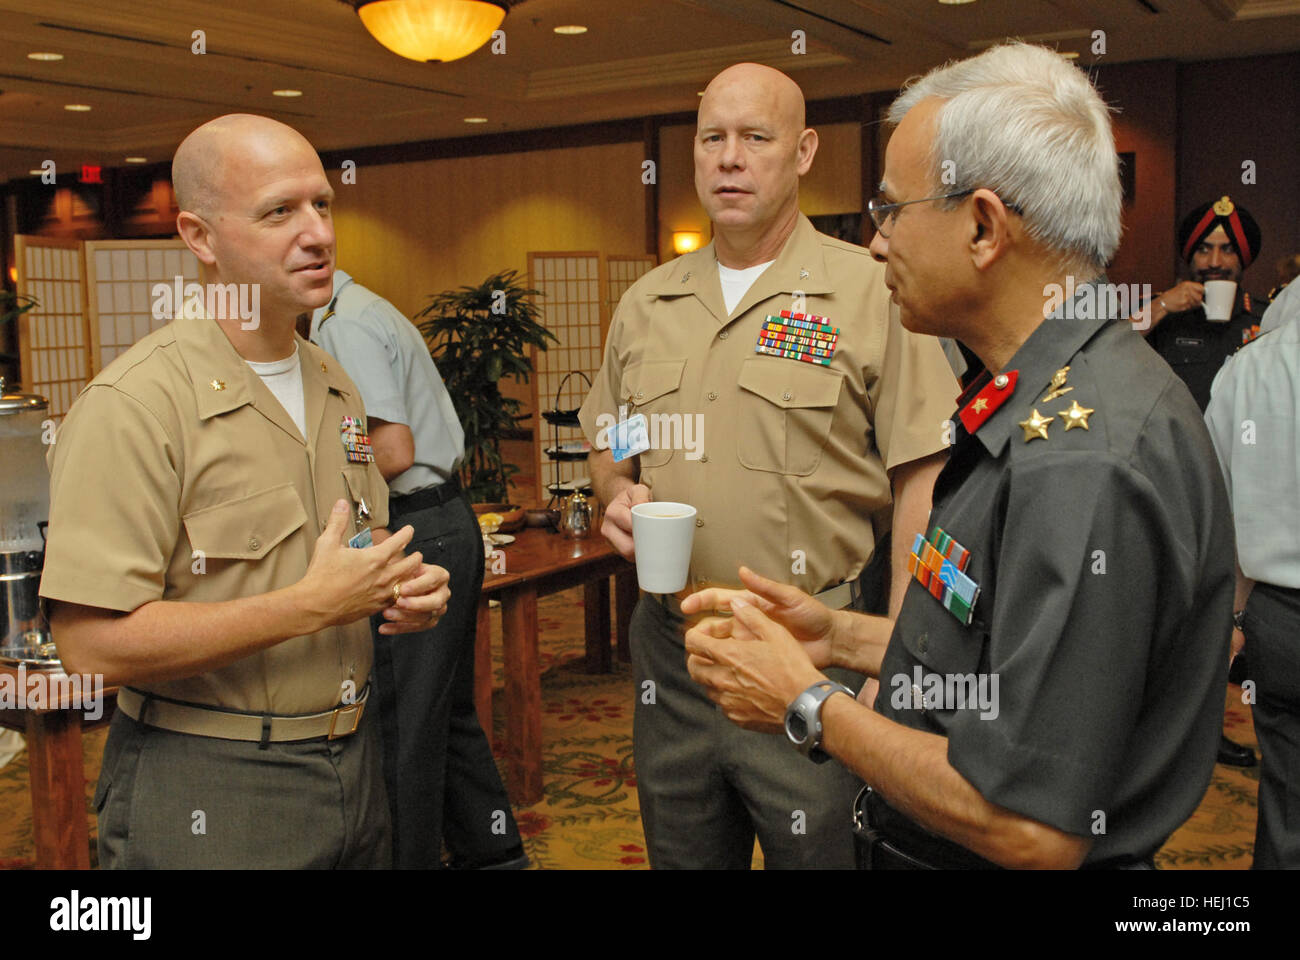 HONOLULU, Hawaii - (from left) Maj. Richard Howell, Marine Forces, Pacific South Asia desk officer, Col. Fred Jameson, Director of Training and Exercises, MARFORPAC, and Brig. Gen. Jatinder Sikand, India Defense Attache to the U.S., build relationships during the India ESG. Maj. Richard Howell, Col. Fred Jameson and Brig. Gen. Jatinder Sikand speaking during the India Executive Steering Group Stock Photo